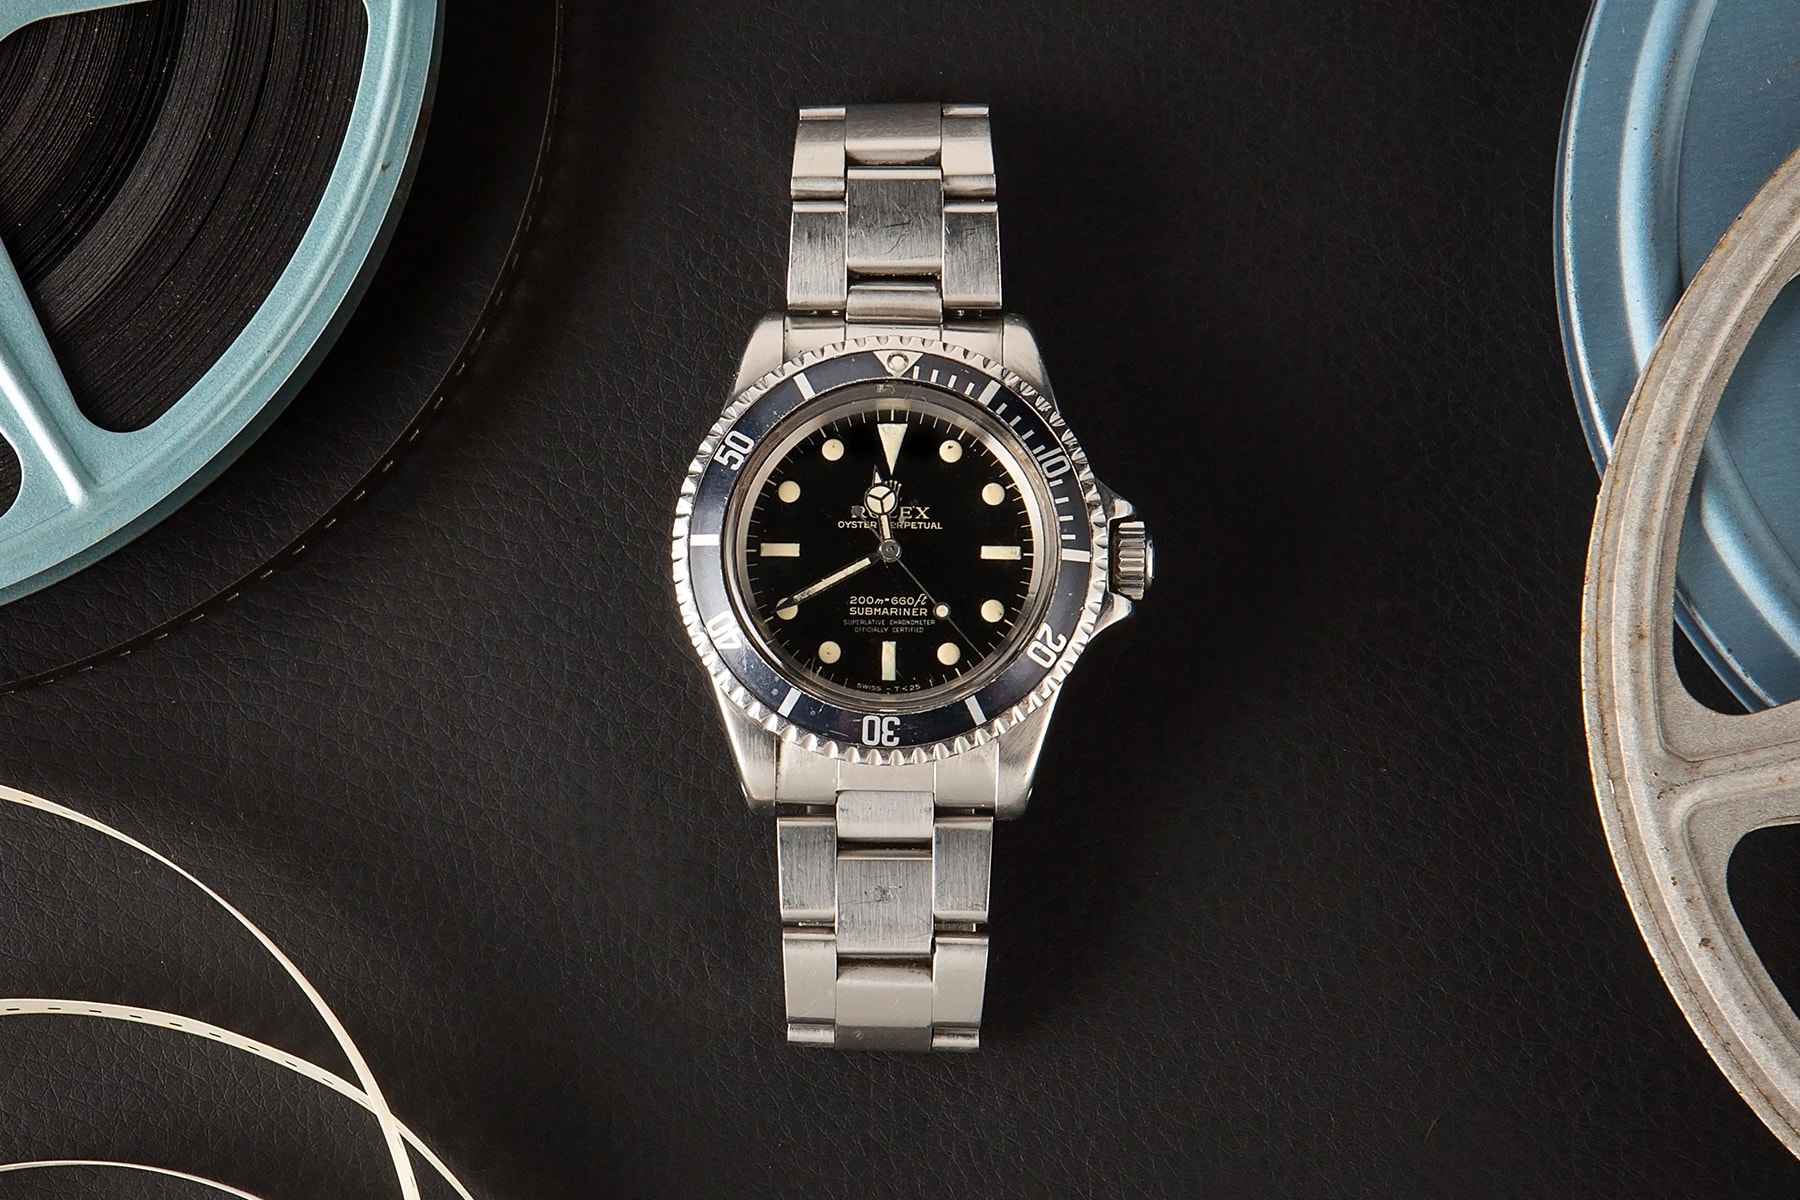 Bobs watches Fresh Finds Iconic Watches of Hollywood Rolex Omega Auction Omega Spectre Bond 007 James Bong Steve McQueen Submariner GMT Pussy Galore Paul Newman Daniel Craig Mr.No Bruce Lee Rolex 